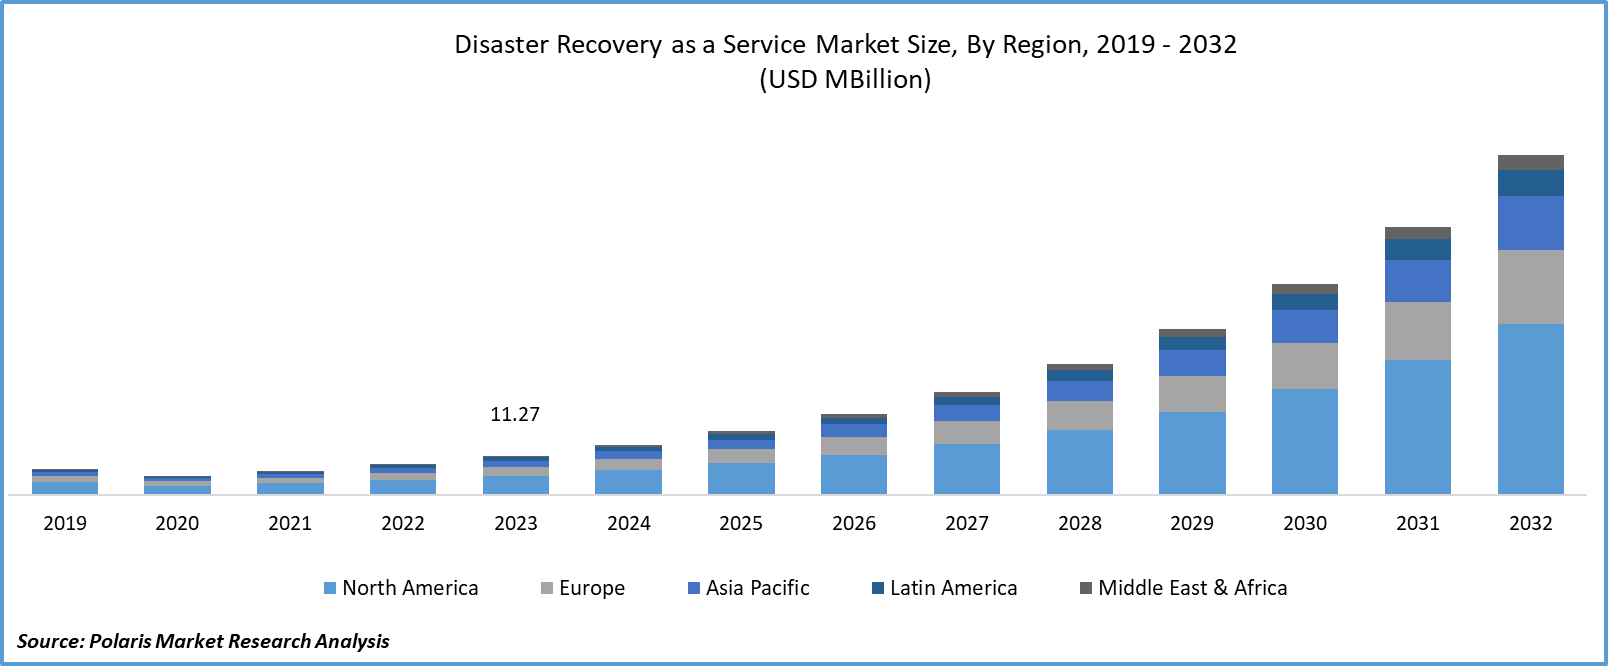 Disaster Recovery as a Service Market Size